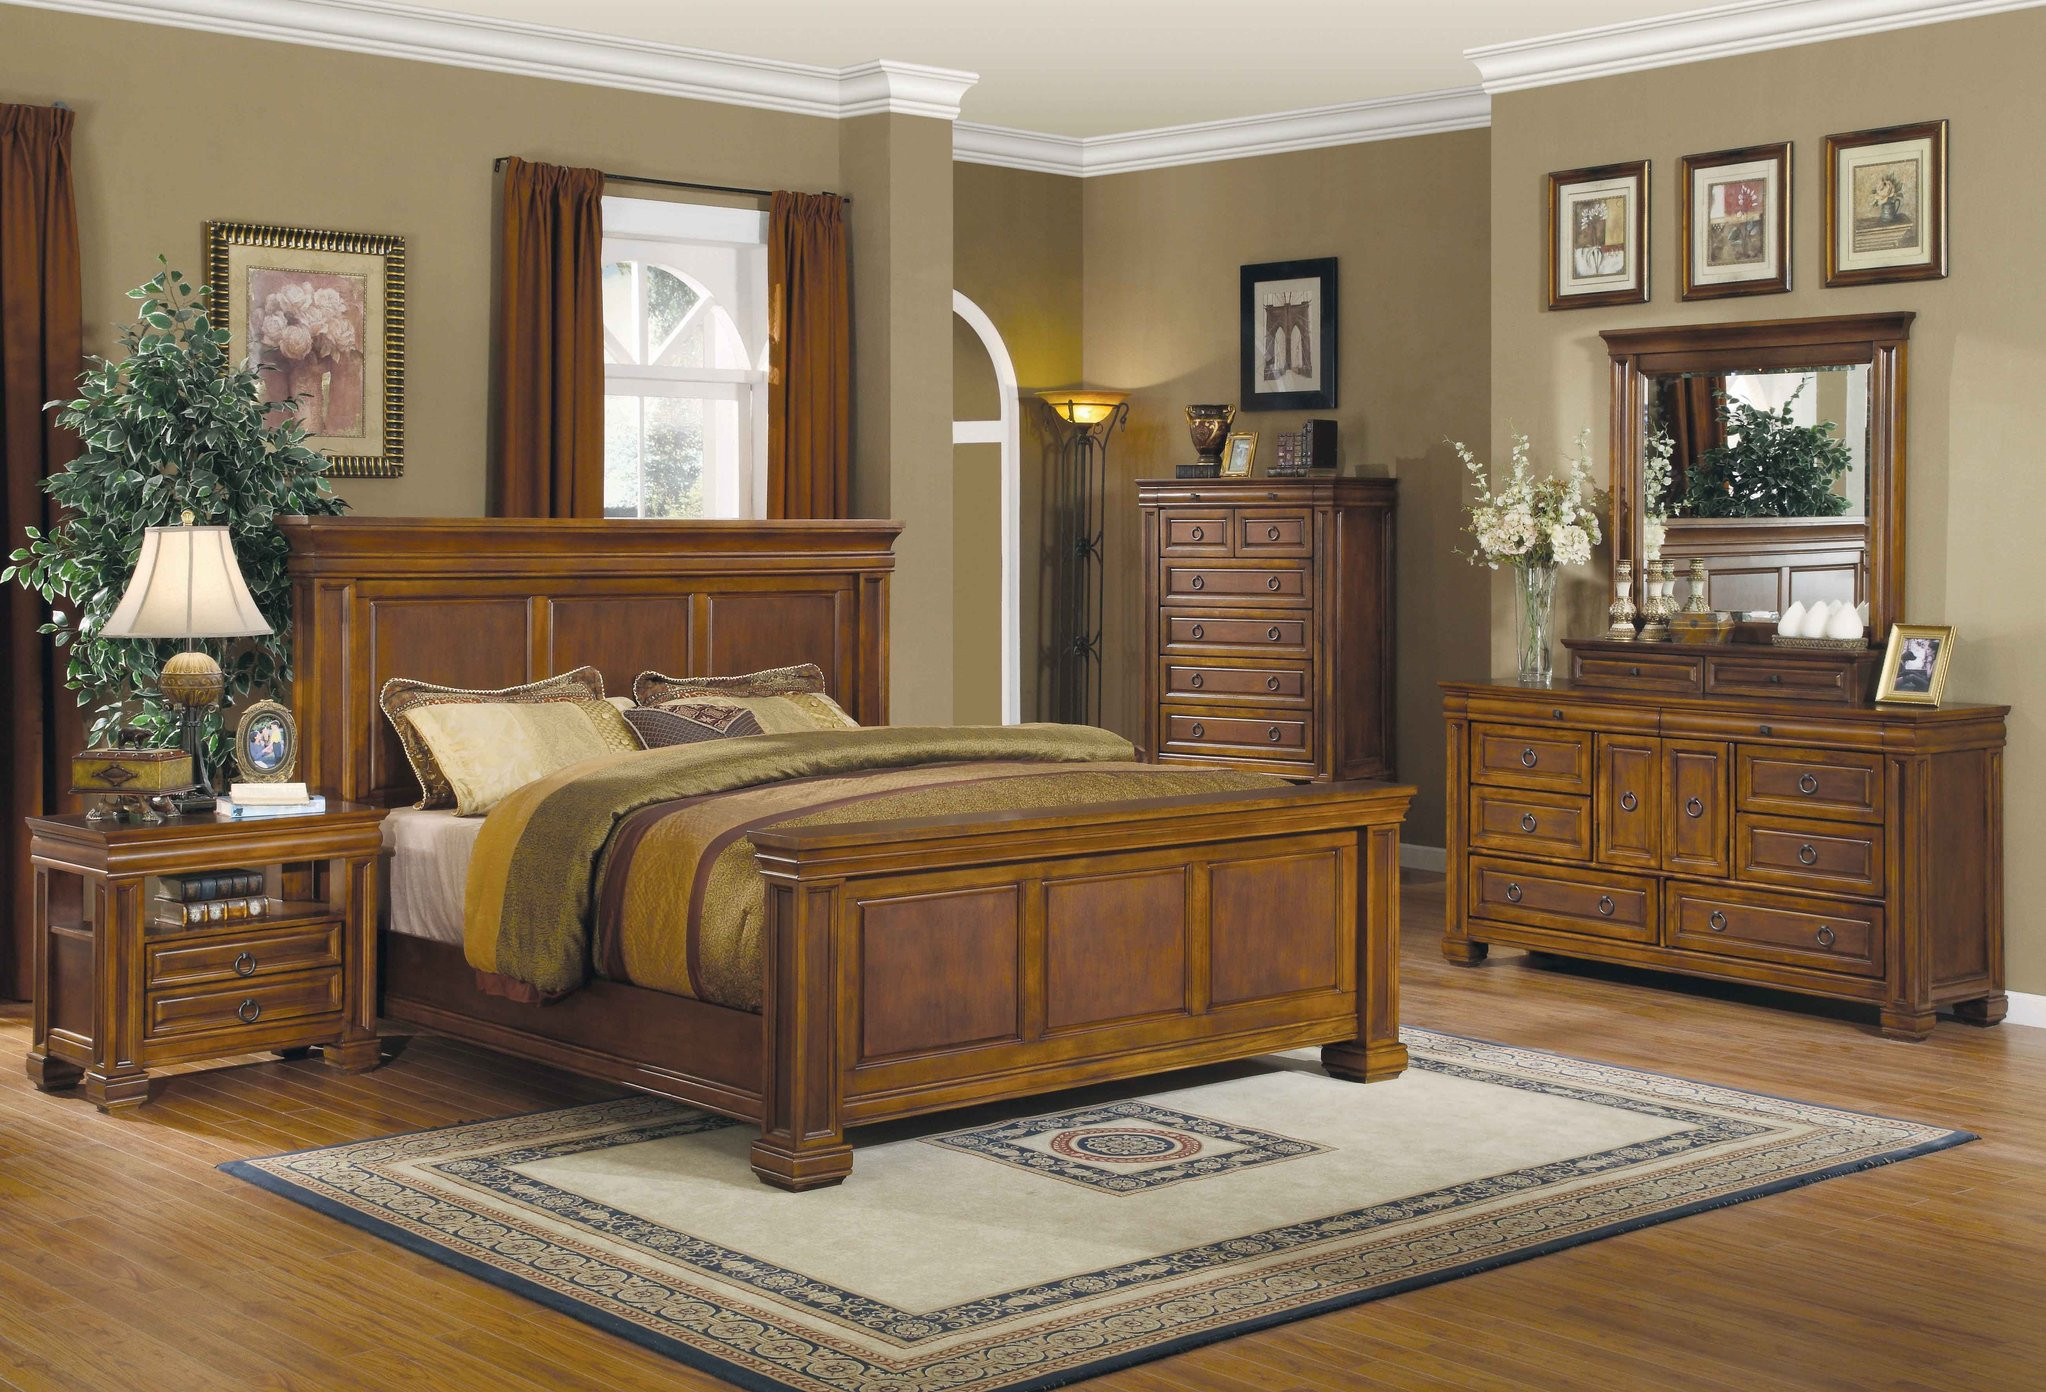 Rustic Wood Bedroom Sets Lovely Antique Rustic Bedroom Furniture Wood King and Queen